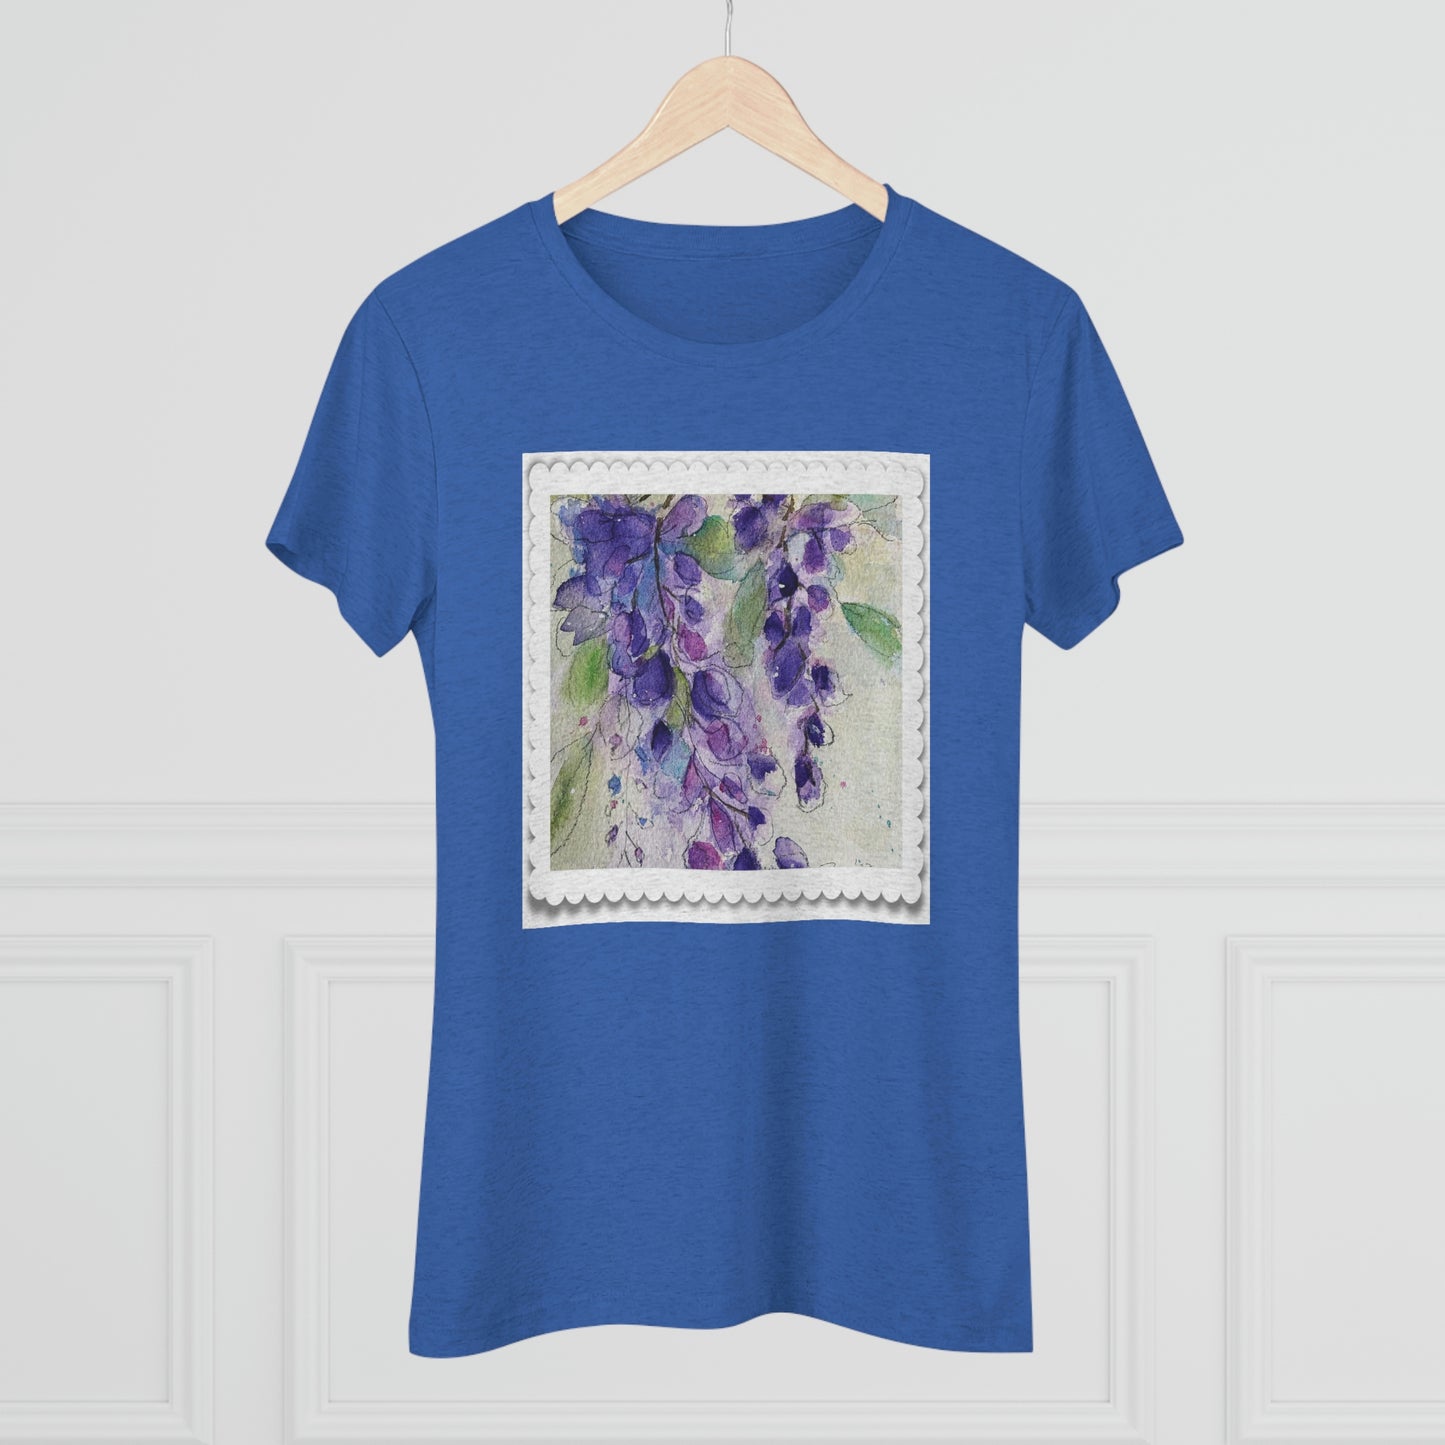 Wisteria Loose Floral Watercolor Women's fitted Triblend Tee  tee shirt